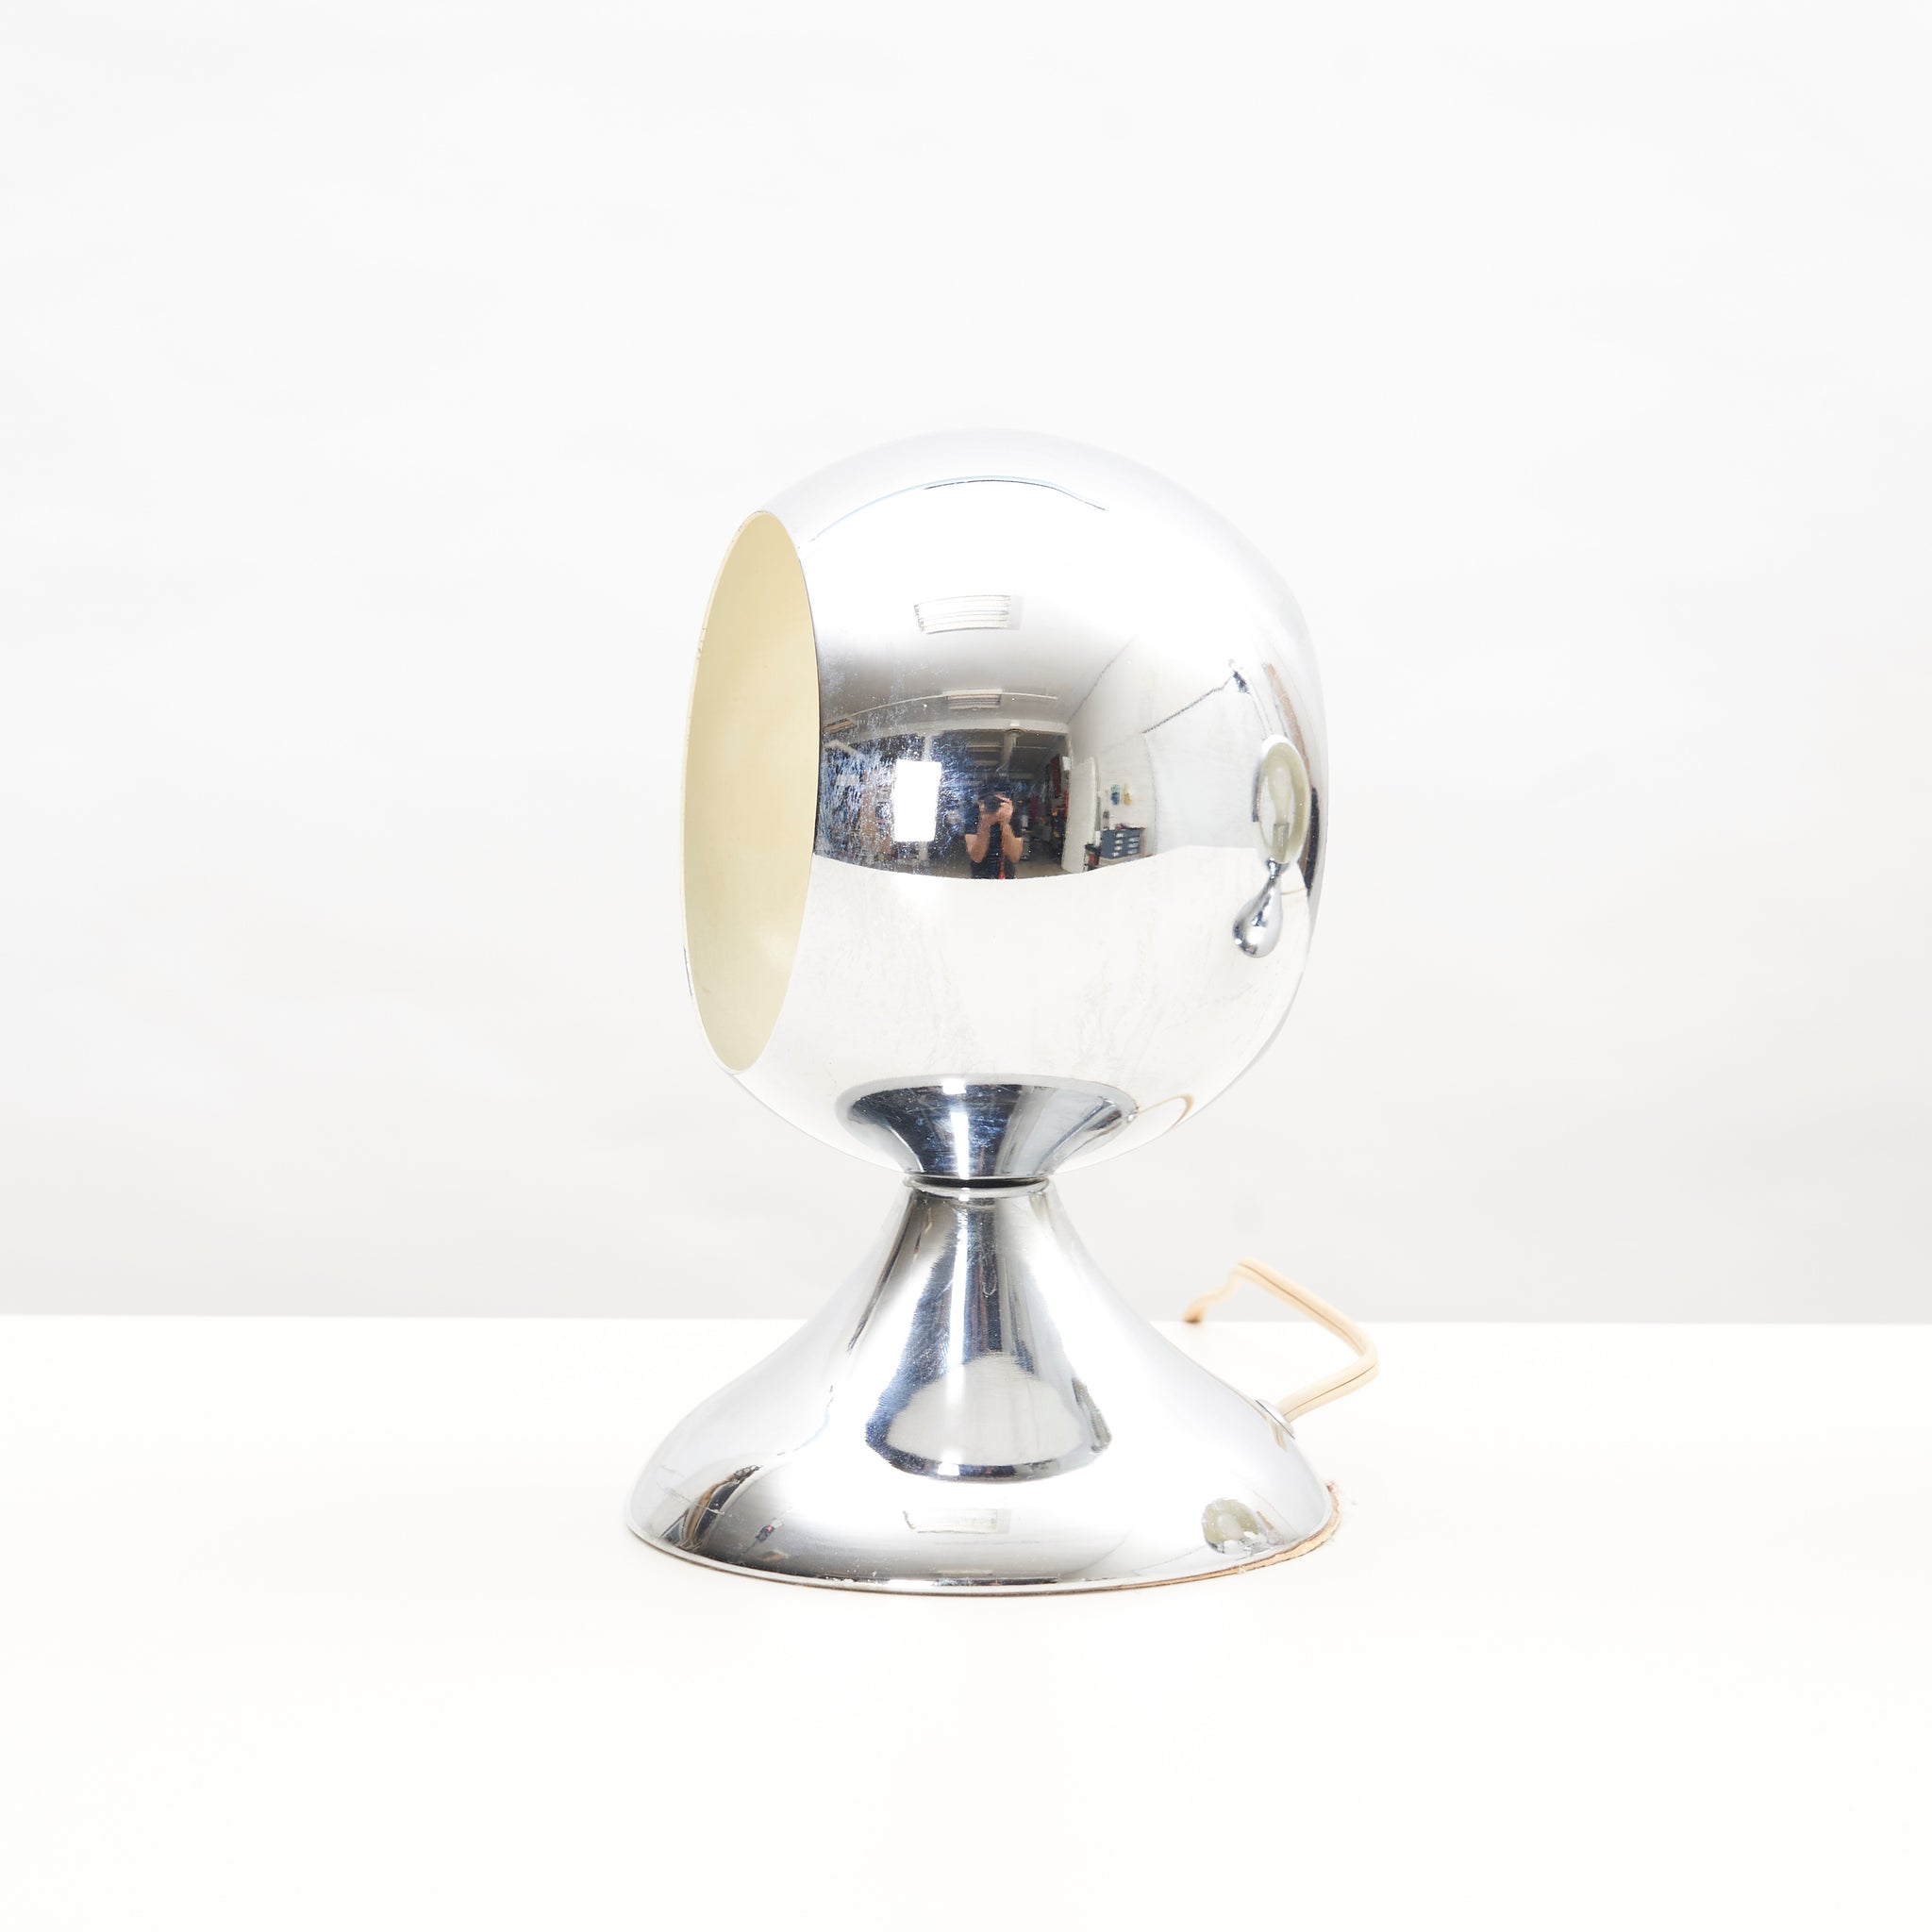 Pair of Chrome Table Lamps